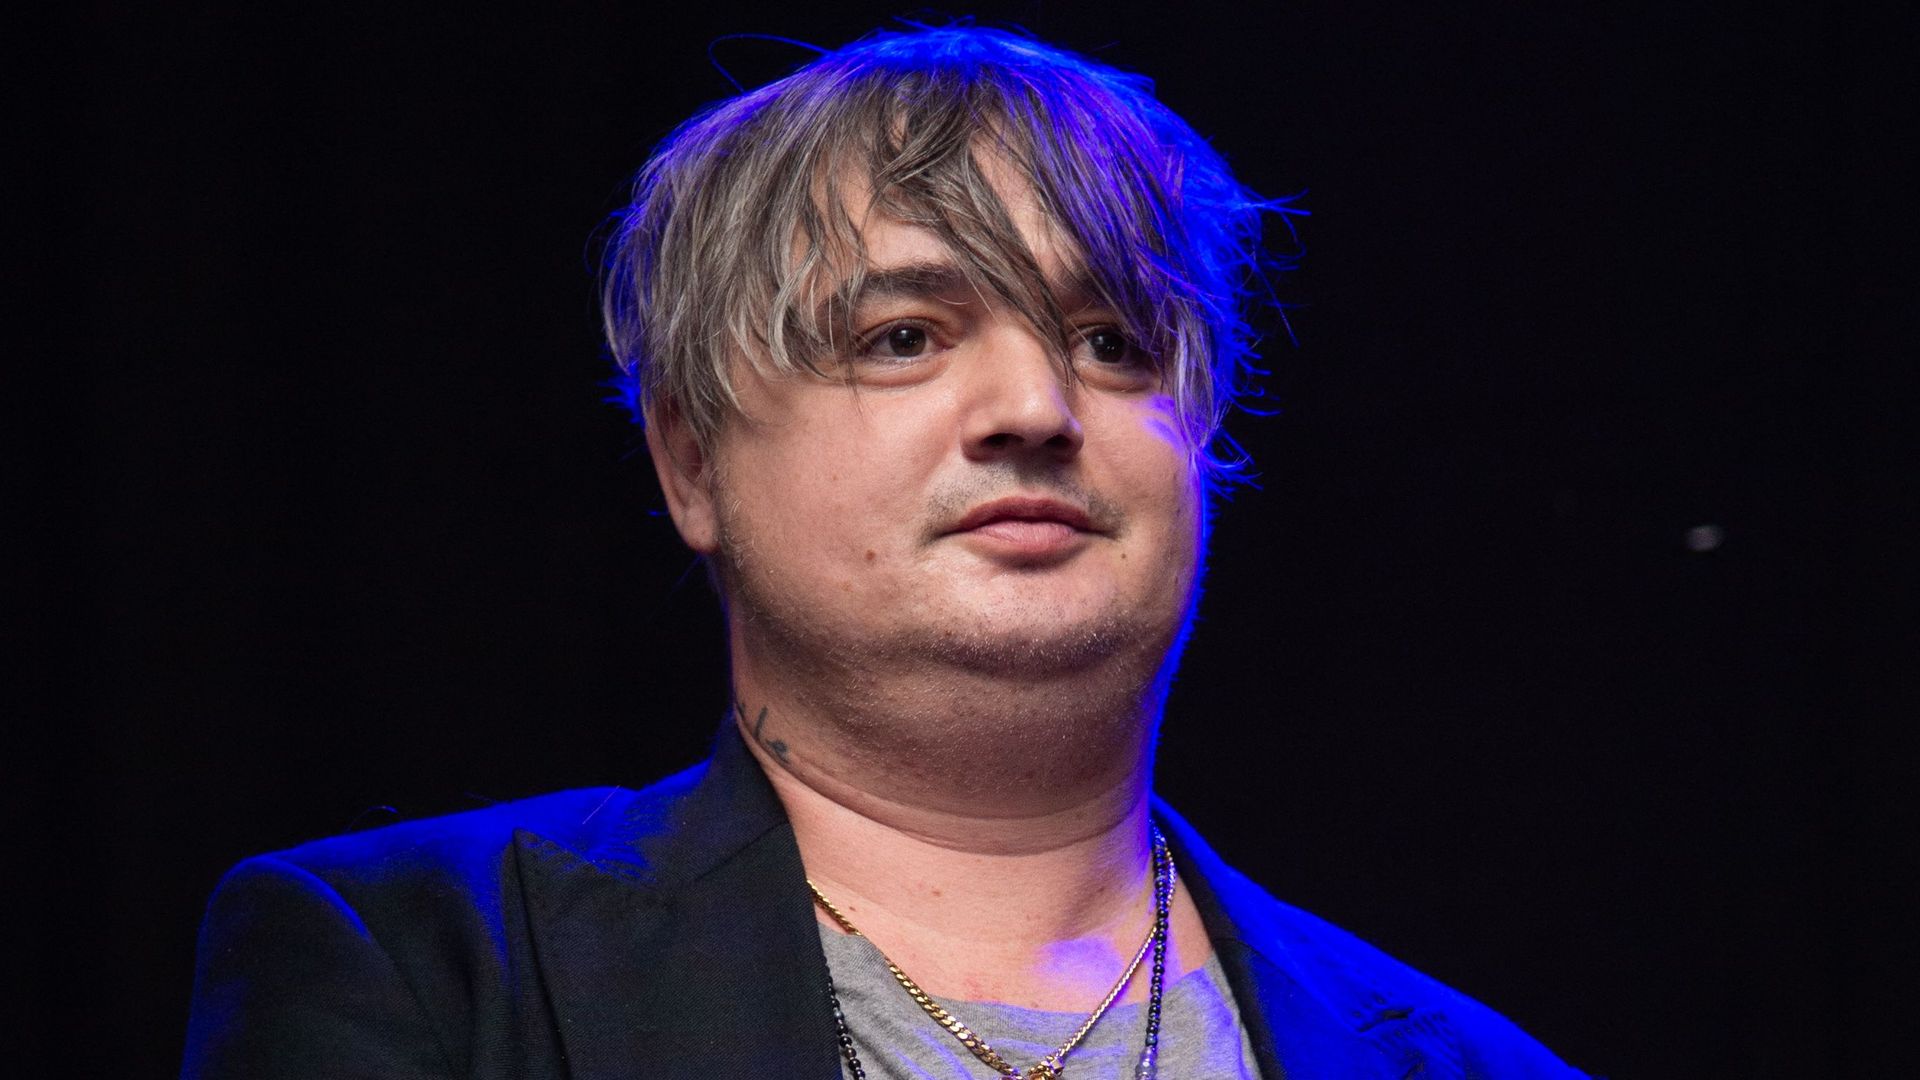 Pete Doherty performing during a concert as part of the 14th Les Arcs Film Festival in Bourg-Saint-Maurice, France on December 12, 2022